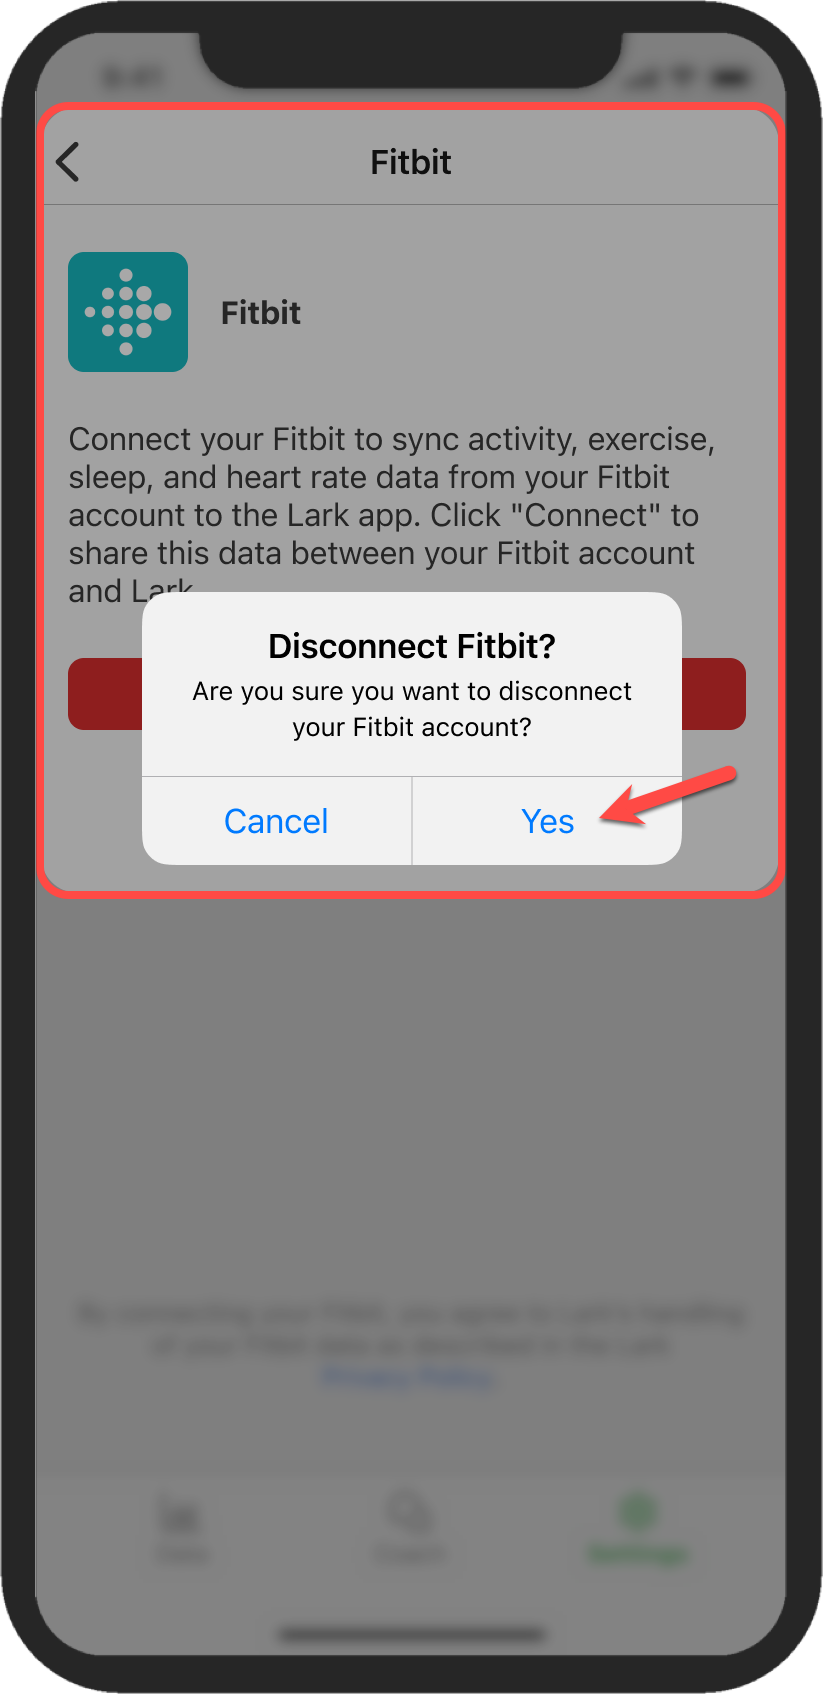 03FitbitDisconnectConfirm.png